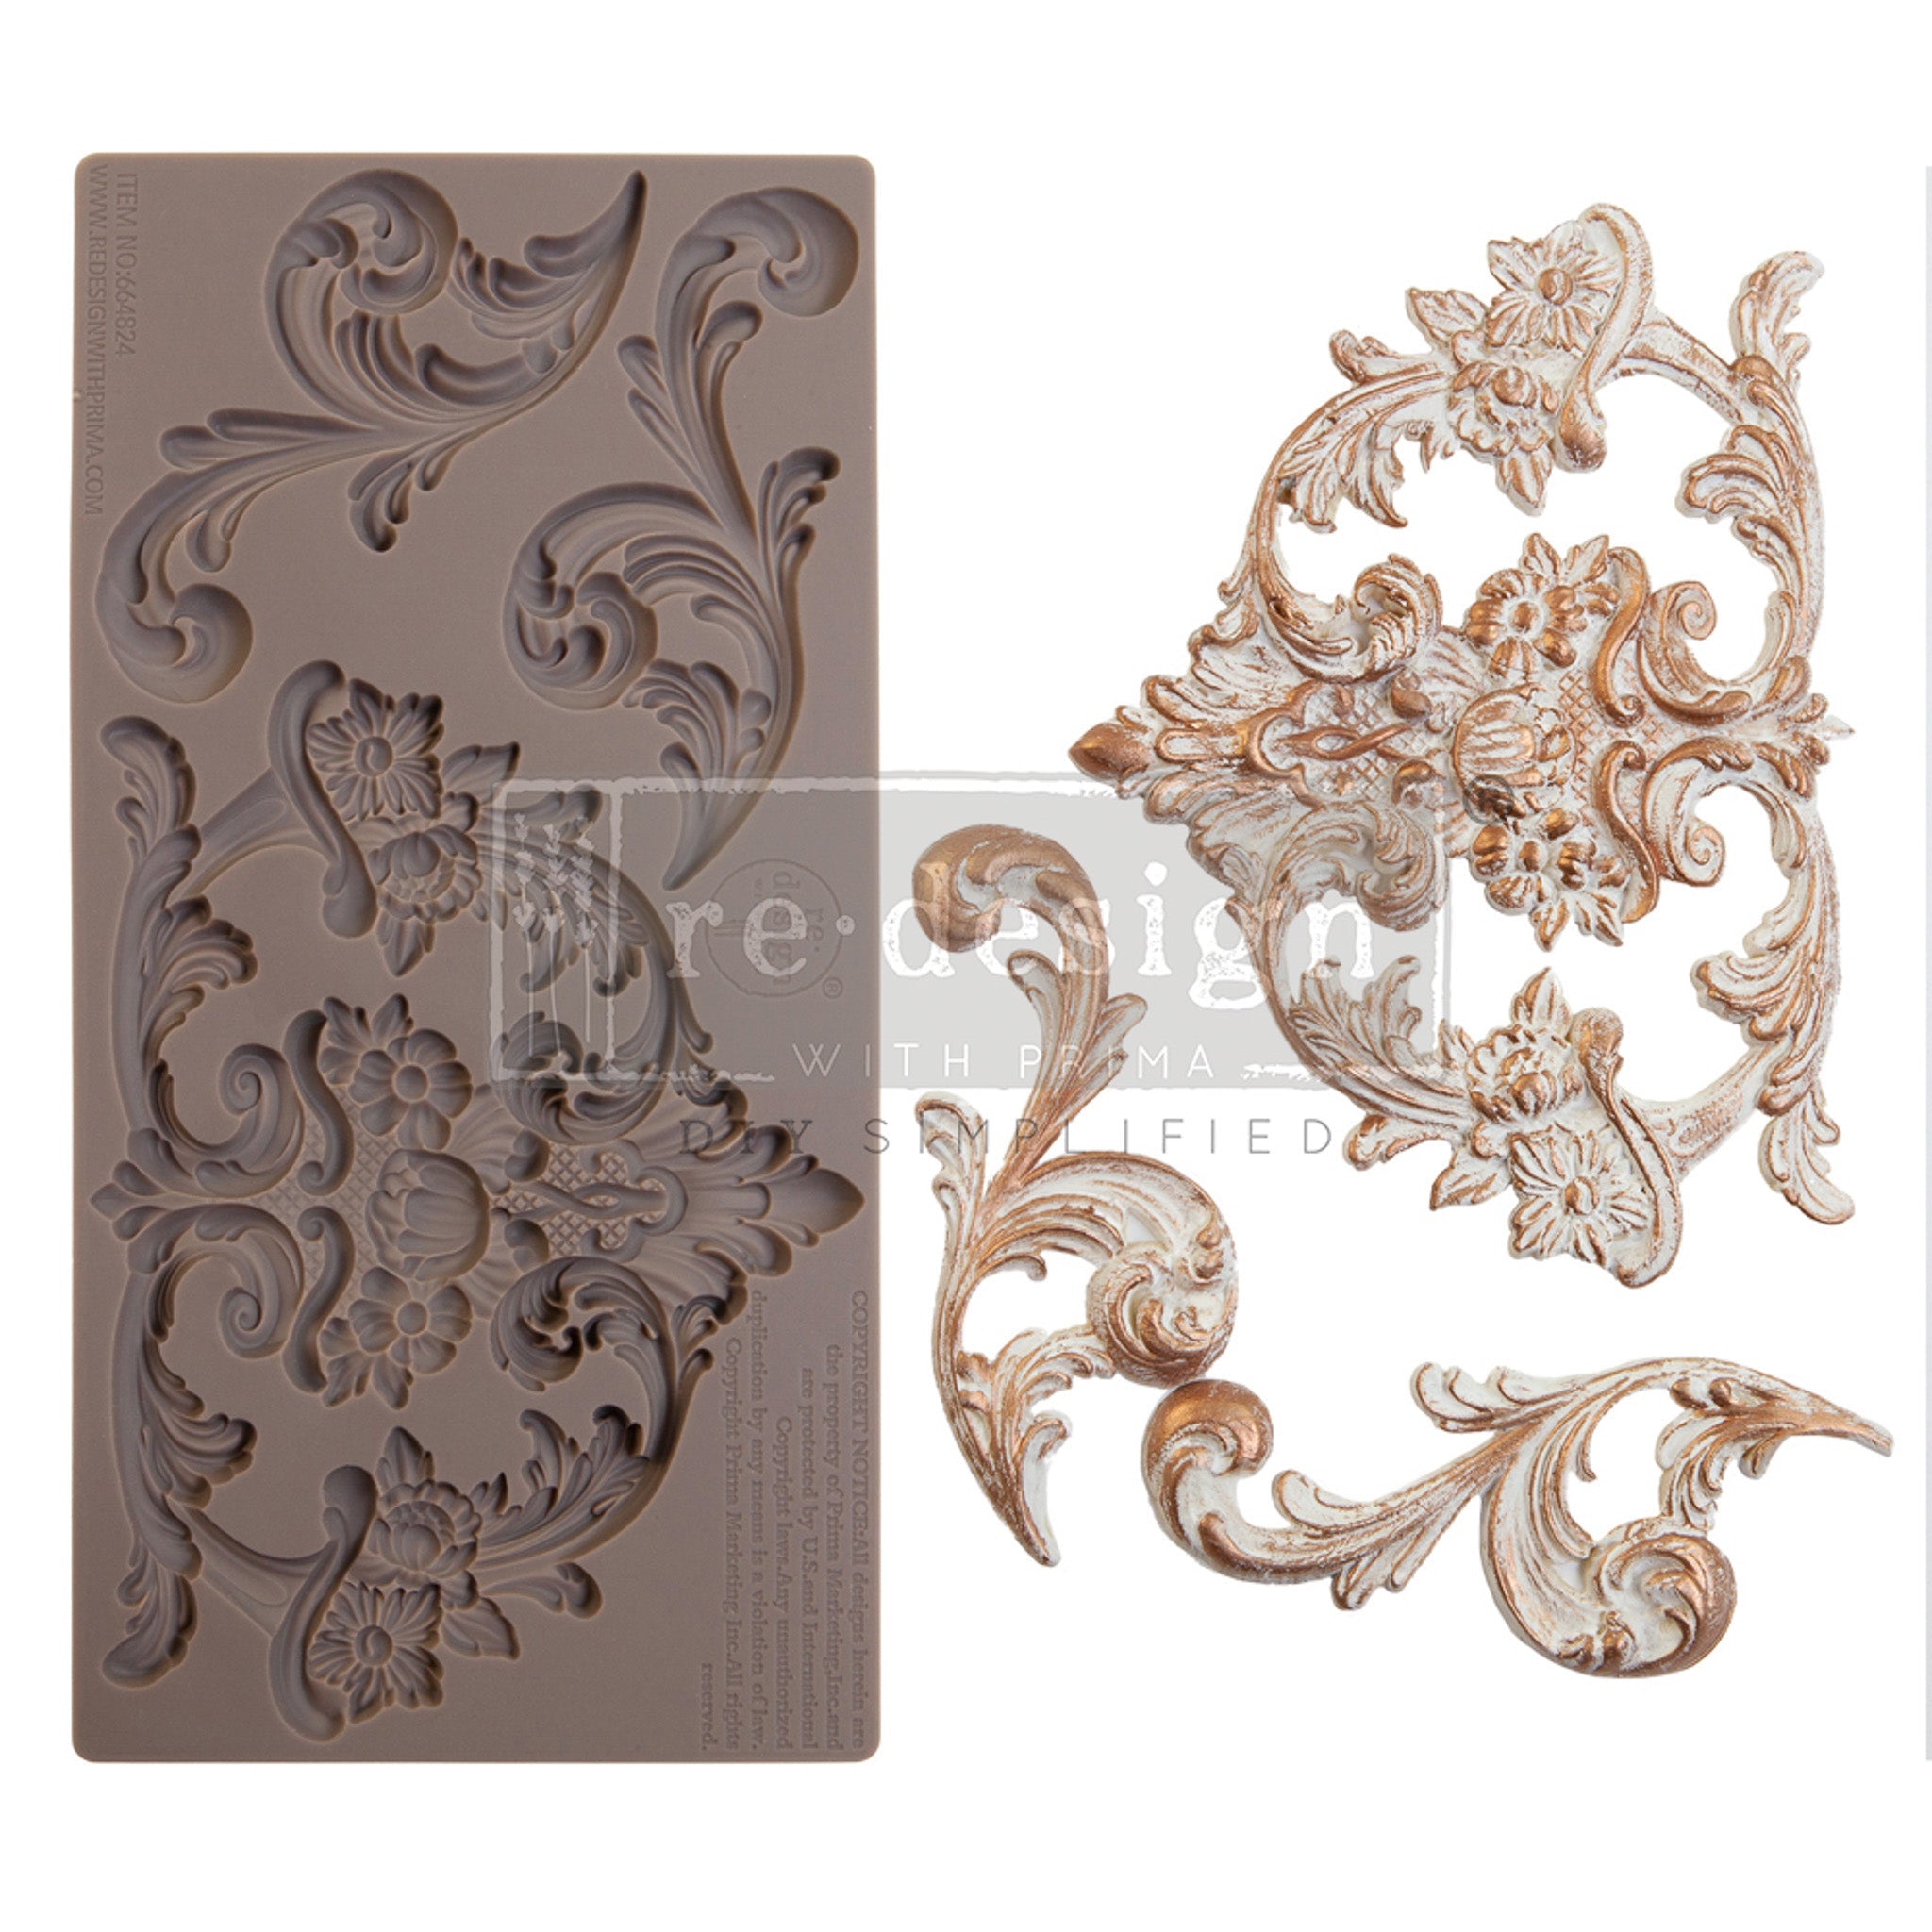 A brown silicone mold and castings of swirl scrolls and a crest are on a white background. A translucent ReDesign with Prima watermark is in the middle of the photo.